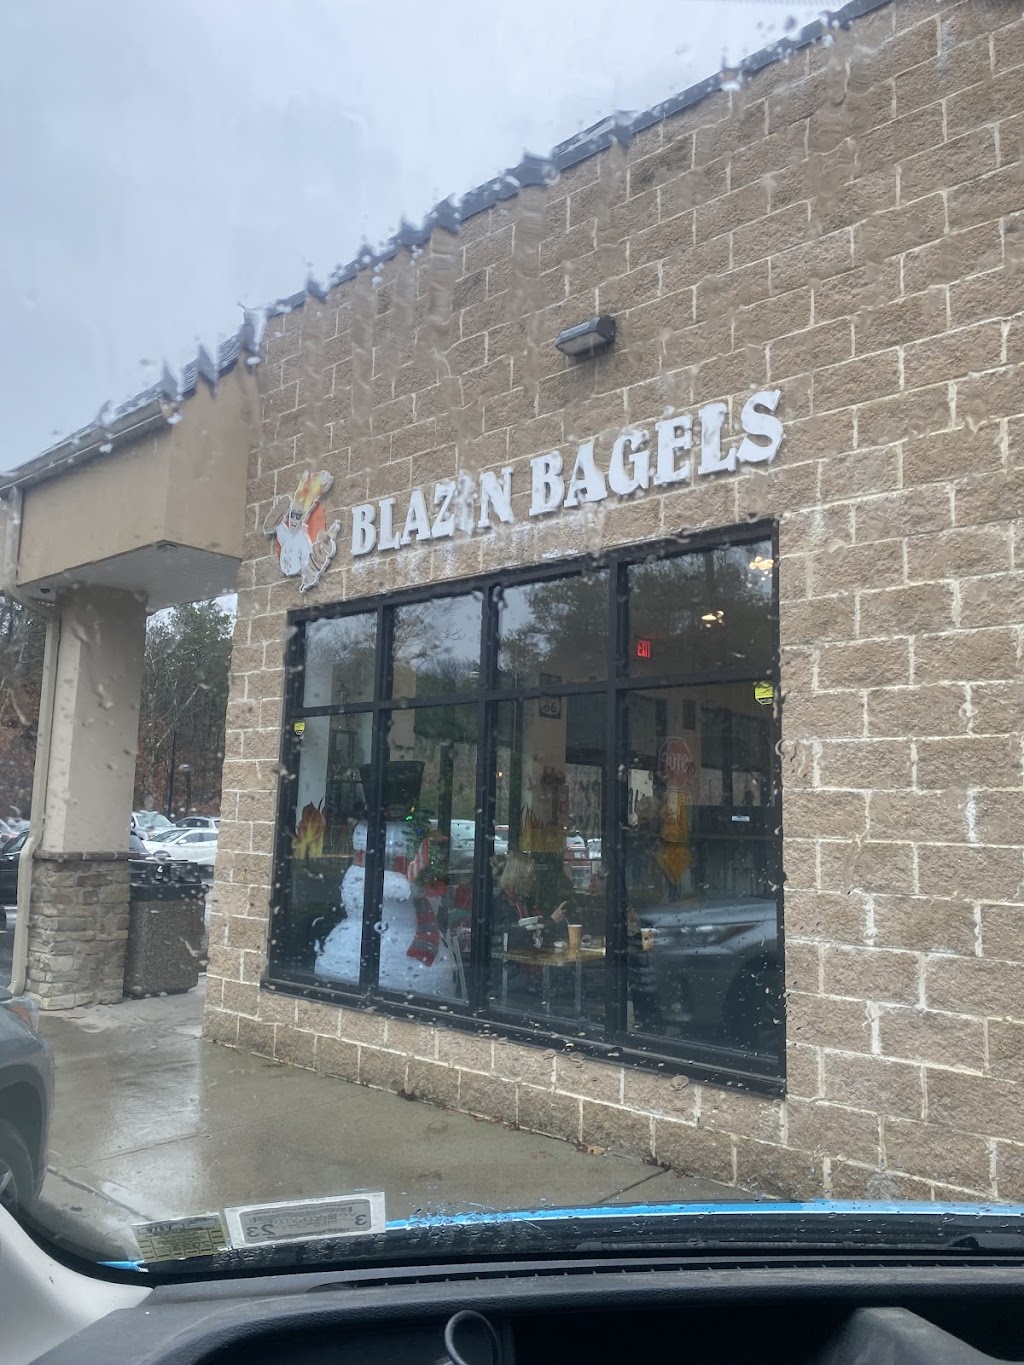 Blazin Bagel and Deli Inc | 287 Wading River Rd, Manorville, NY 11949 | Phone: (631) 230-3255